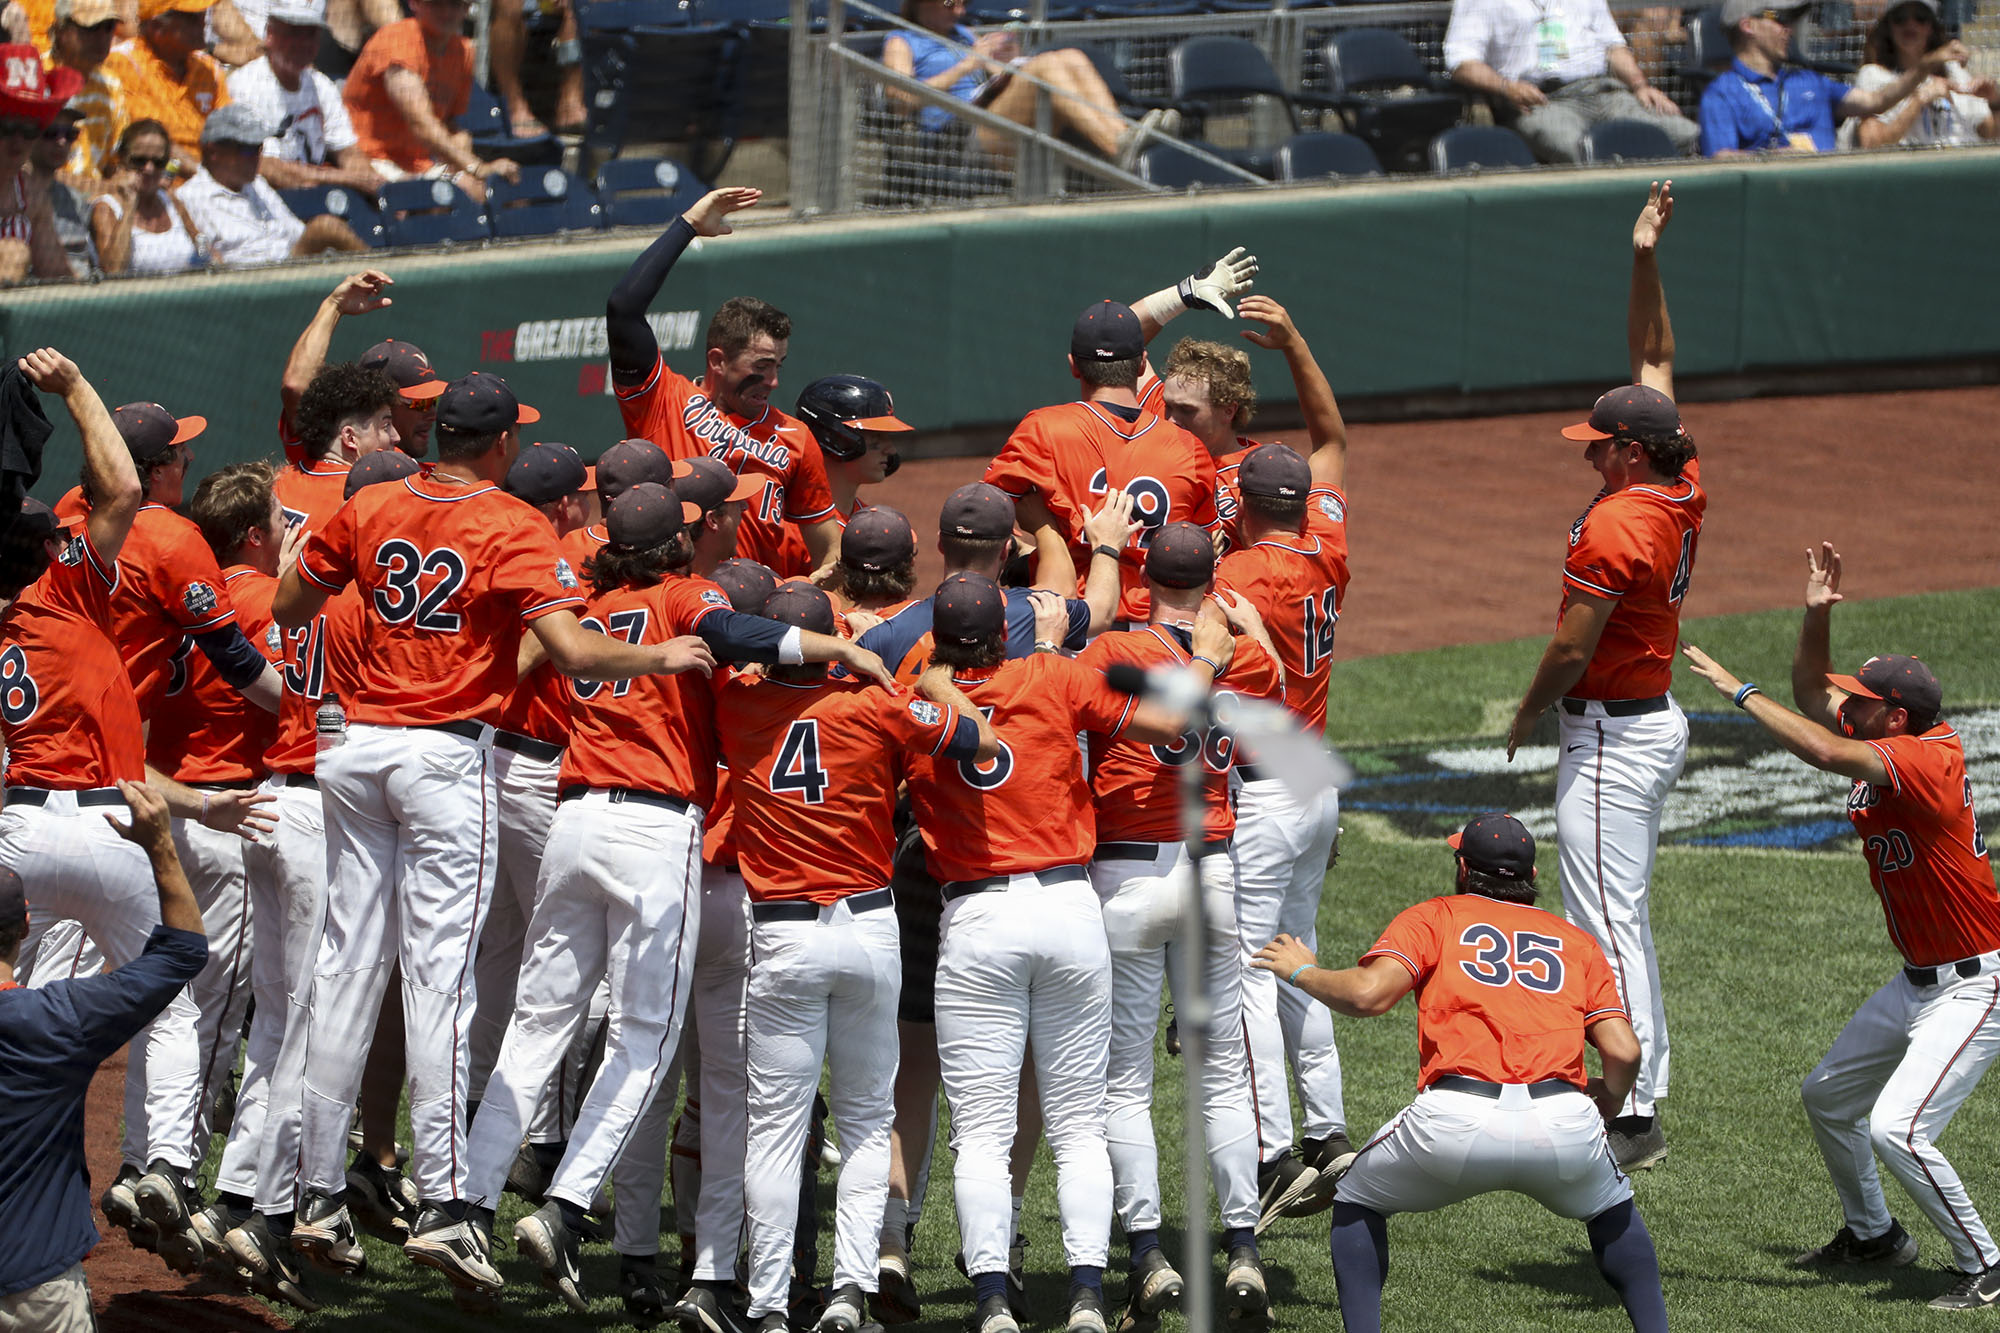 UVA baseball team jumps in at home plate after victory 